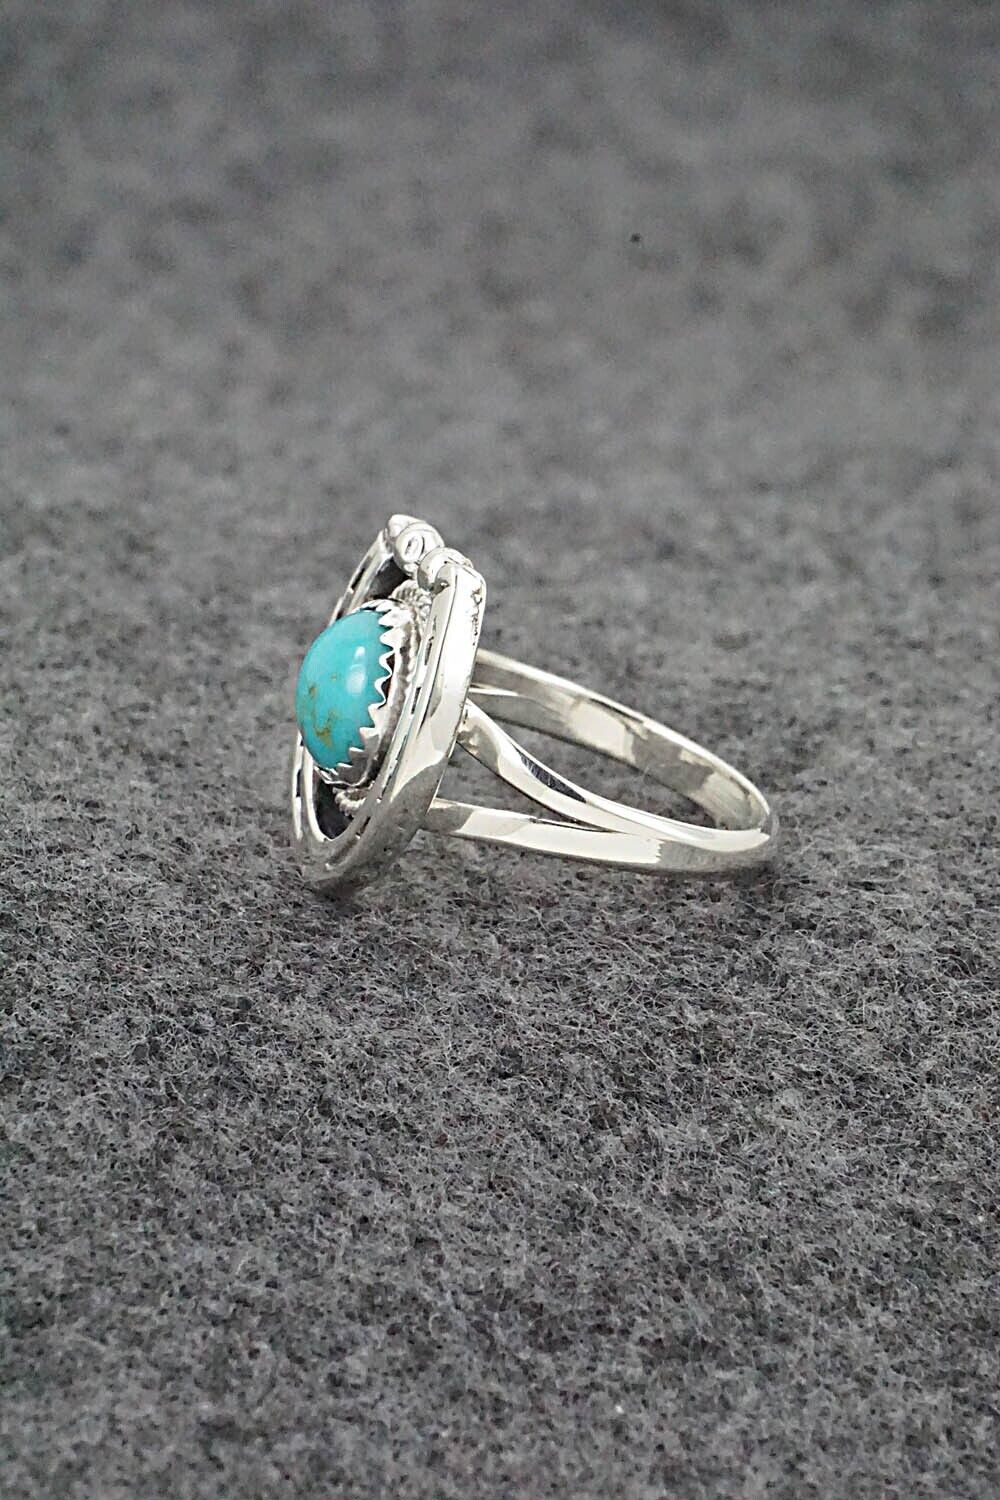 Turquoise & Sterling Silver Ring - Alice Rose Saunders - Size 7